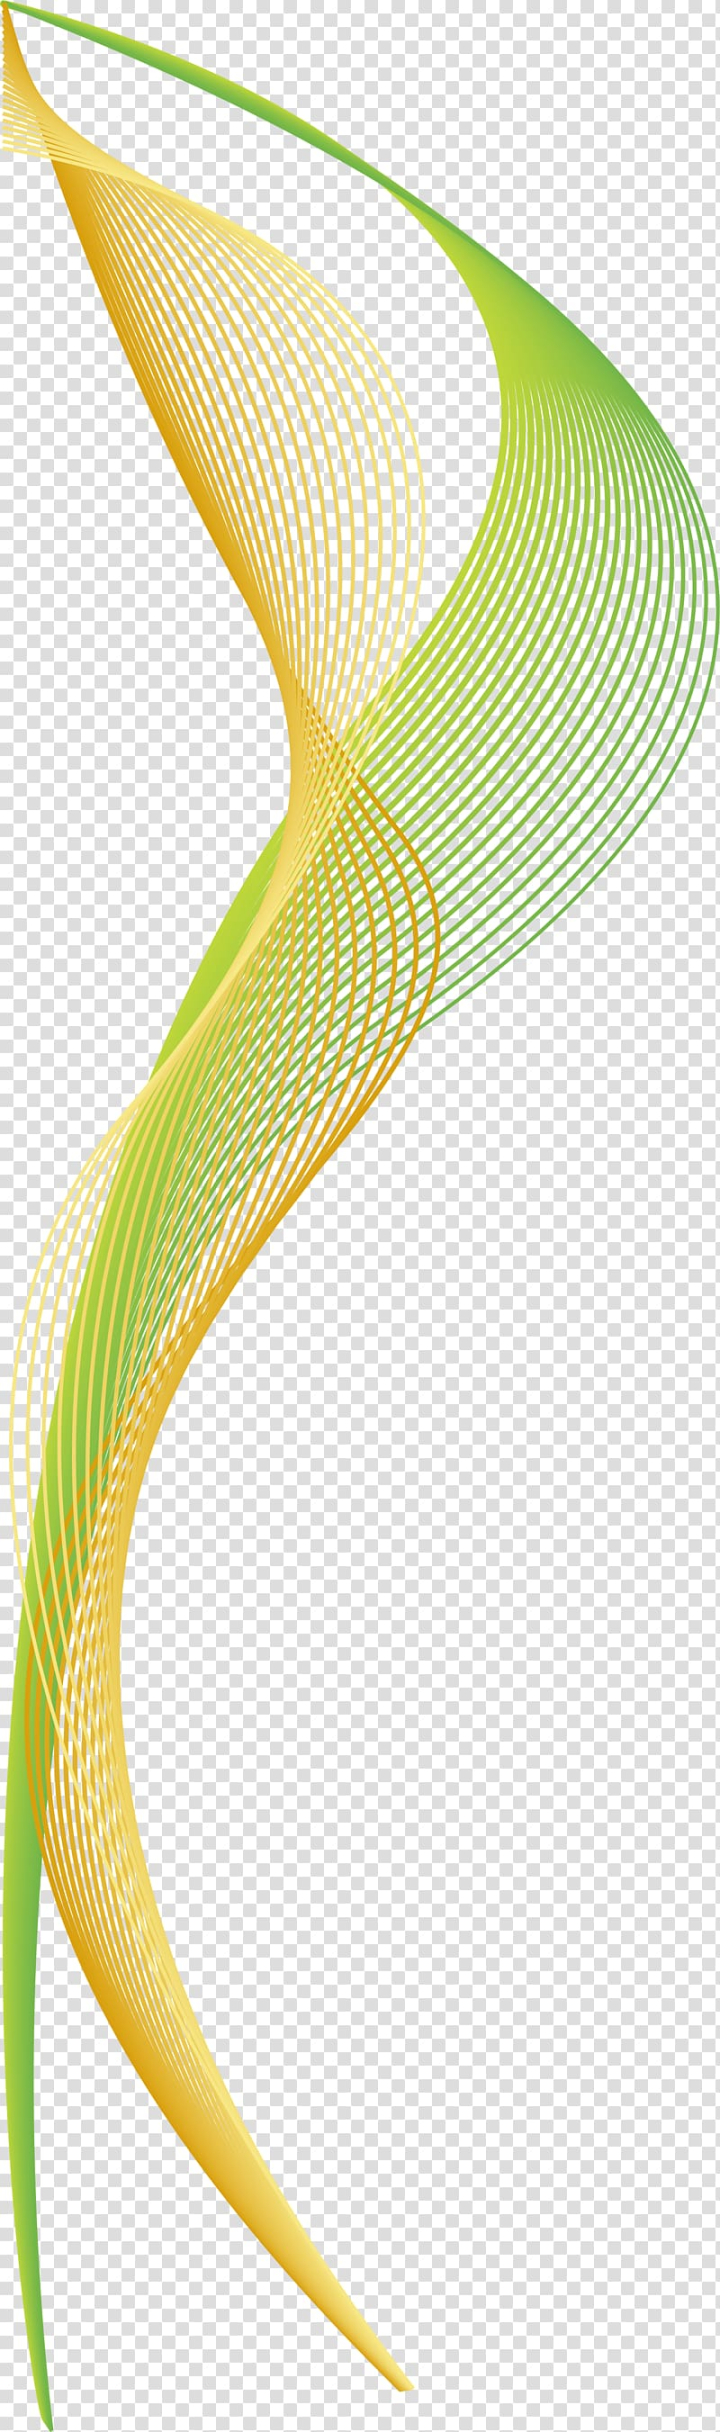 green,euclidean,line,angle,simple,color,abstract lines,light,green tea,dream,plot,twist,vecteur,resource,wing,science,green leaf,background green,curved arrow,curved lines,graphic design,gratis,yellow,curve,euclidean vector,arc,green line,stands,illustration,png clipart,free png,transparent background,free clipart,clip art,free download,png,comhiclipart